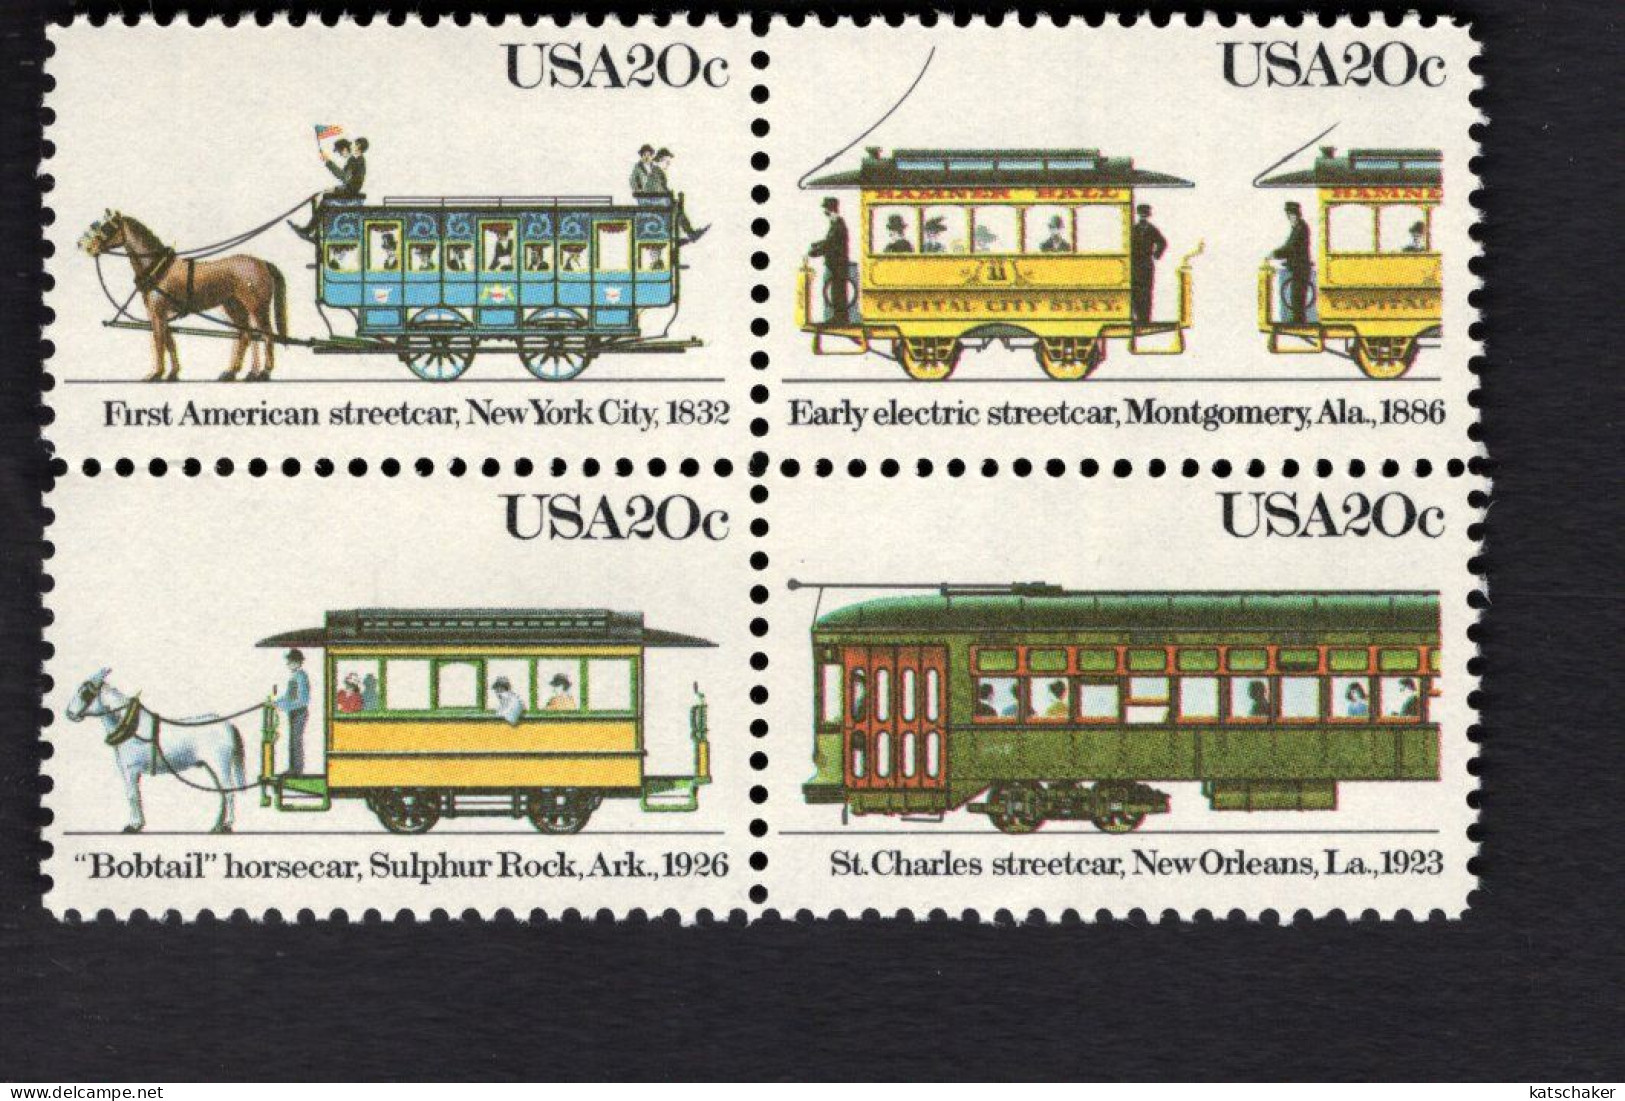 205222496 1983 SCOTT 2062A (XX) POSTFRIS MINT NEVER HINGED - STREETCARS - 2059 FIRST STAMP OF BLOCK - Unused Stamps